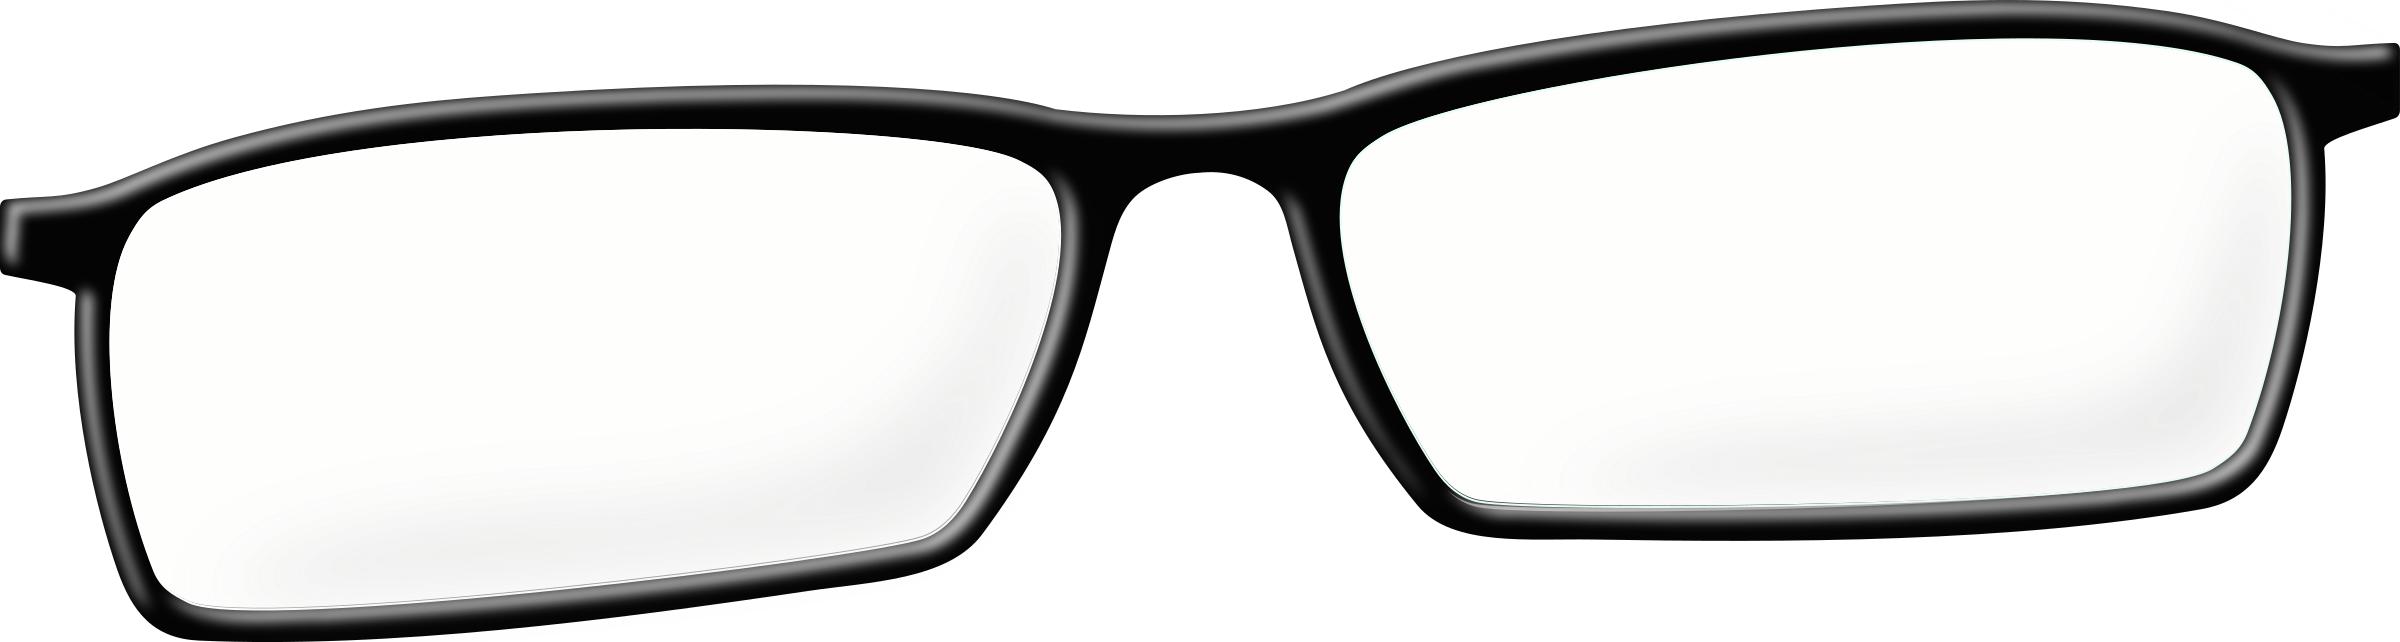 glasses PNG icons